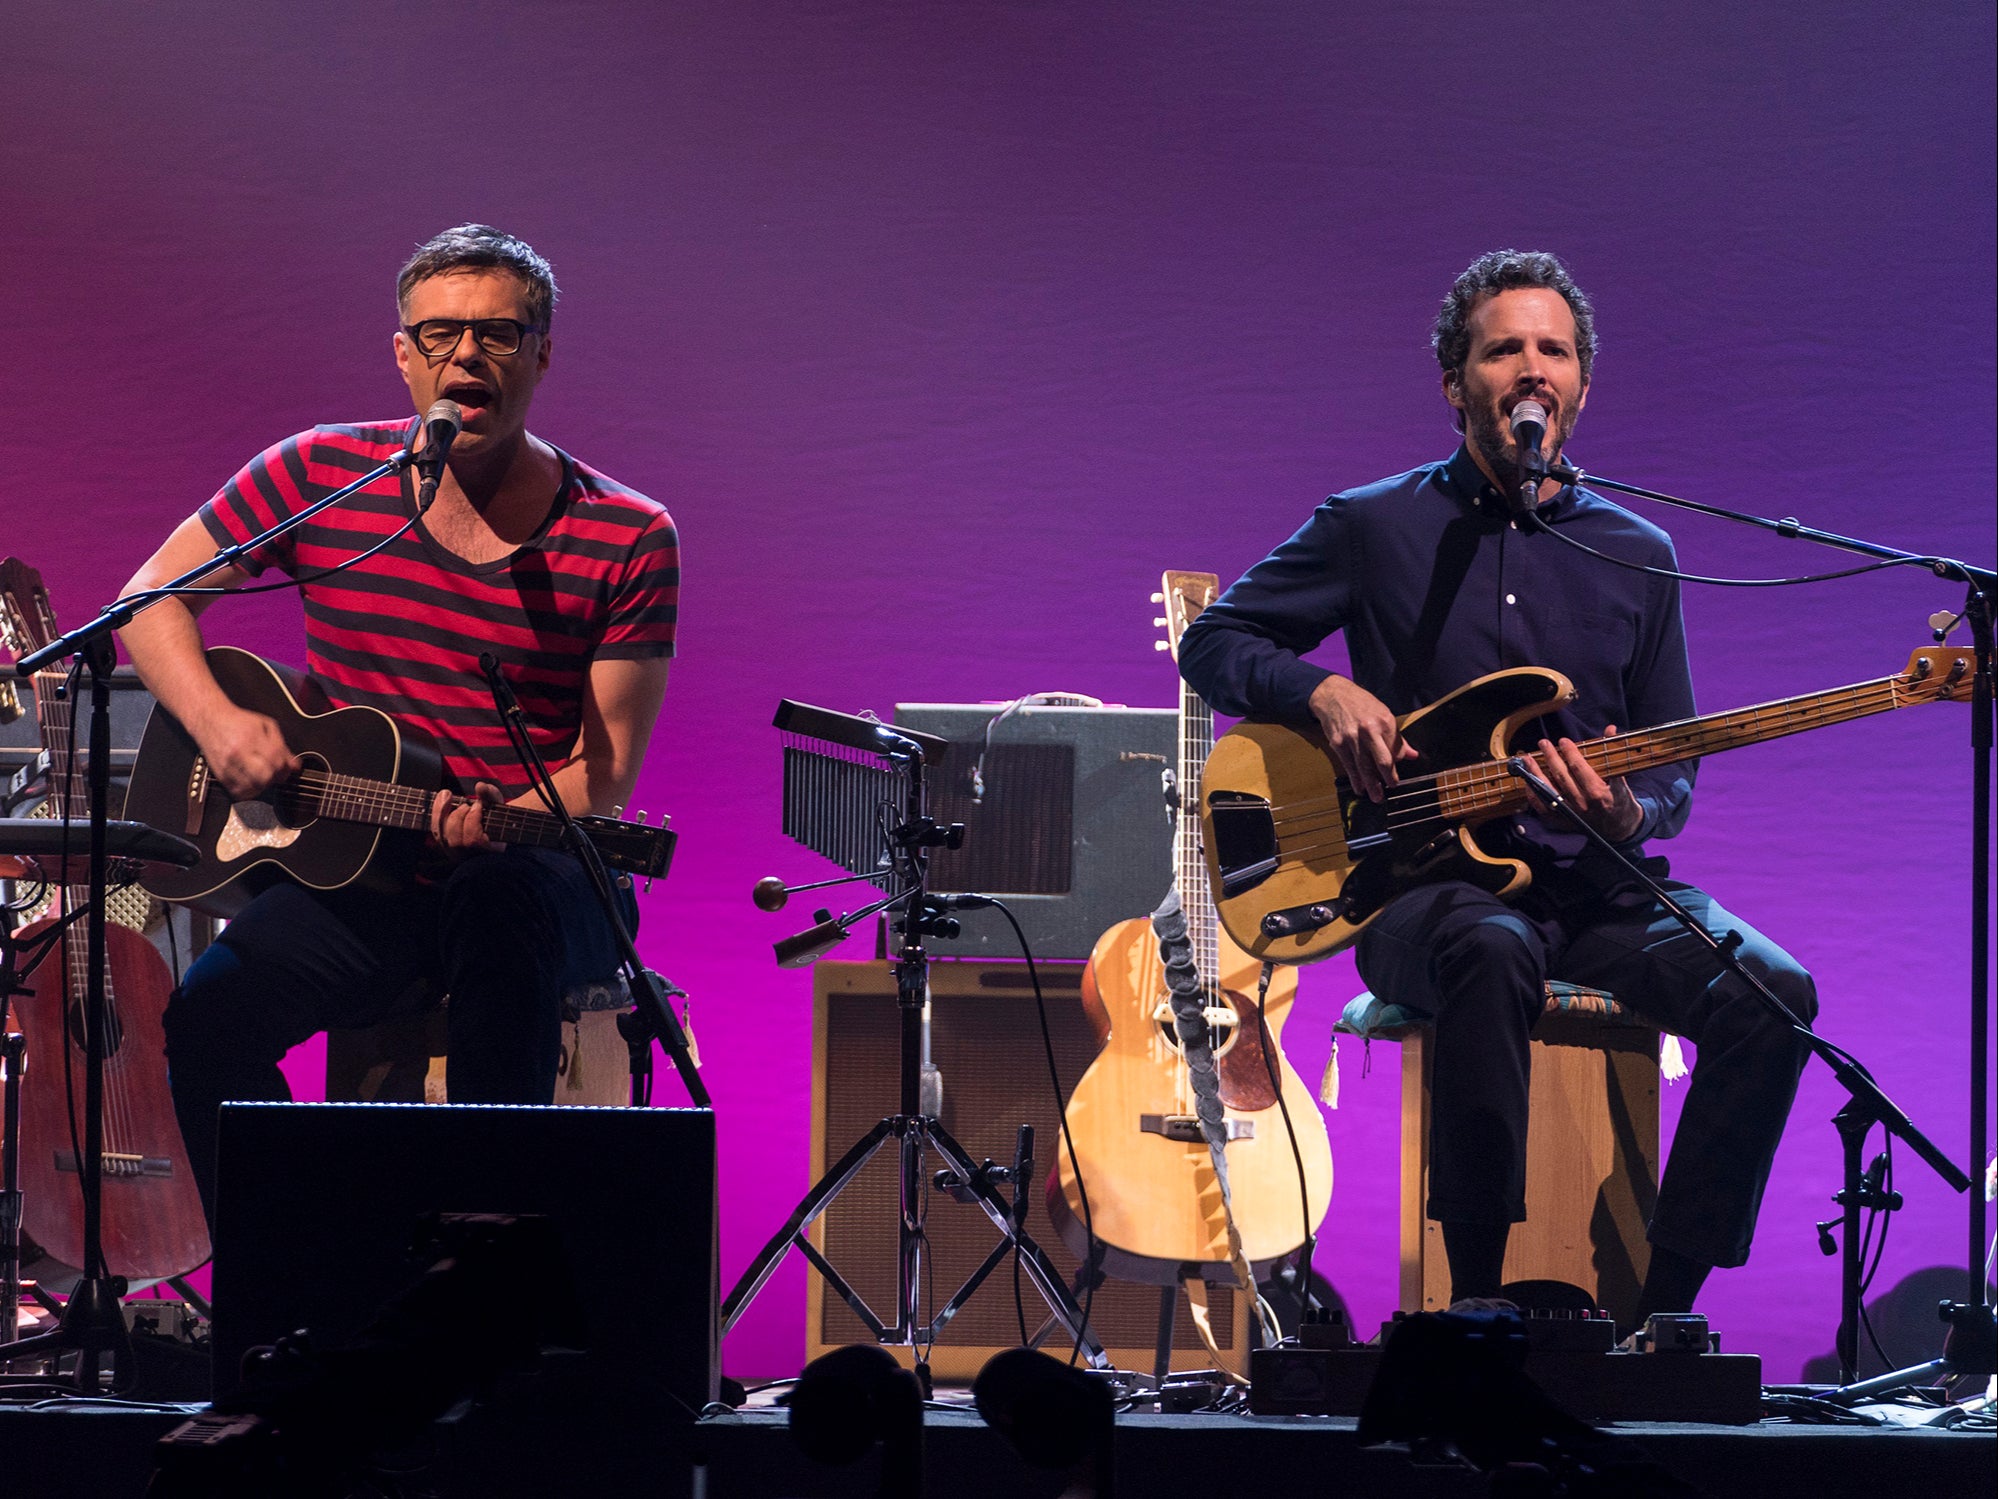 Flight of the Conchords: Jemaine Clement and McKenzie performing together in 2018